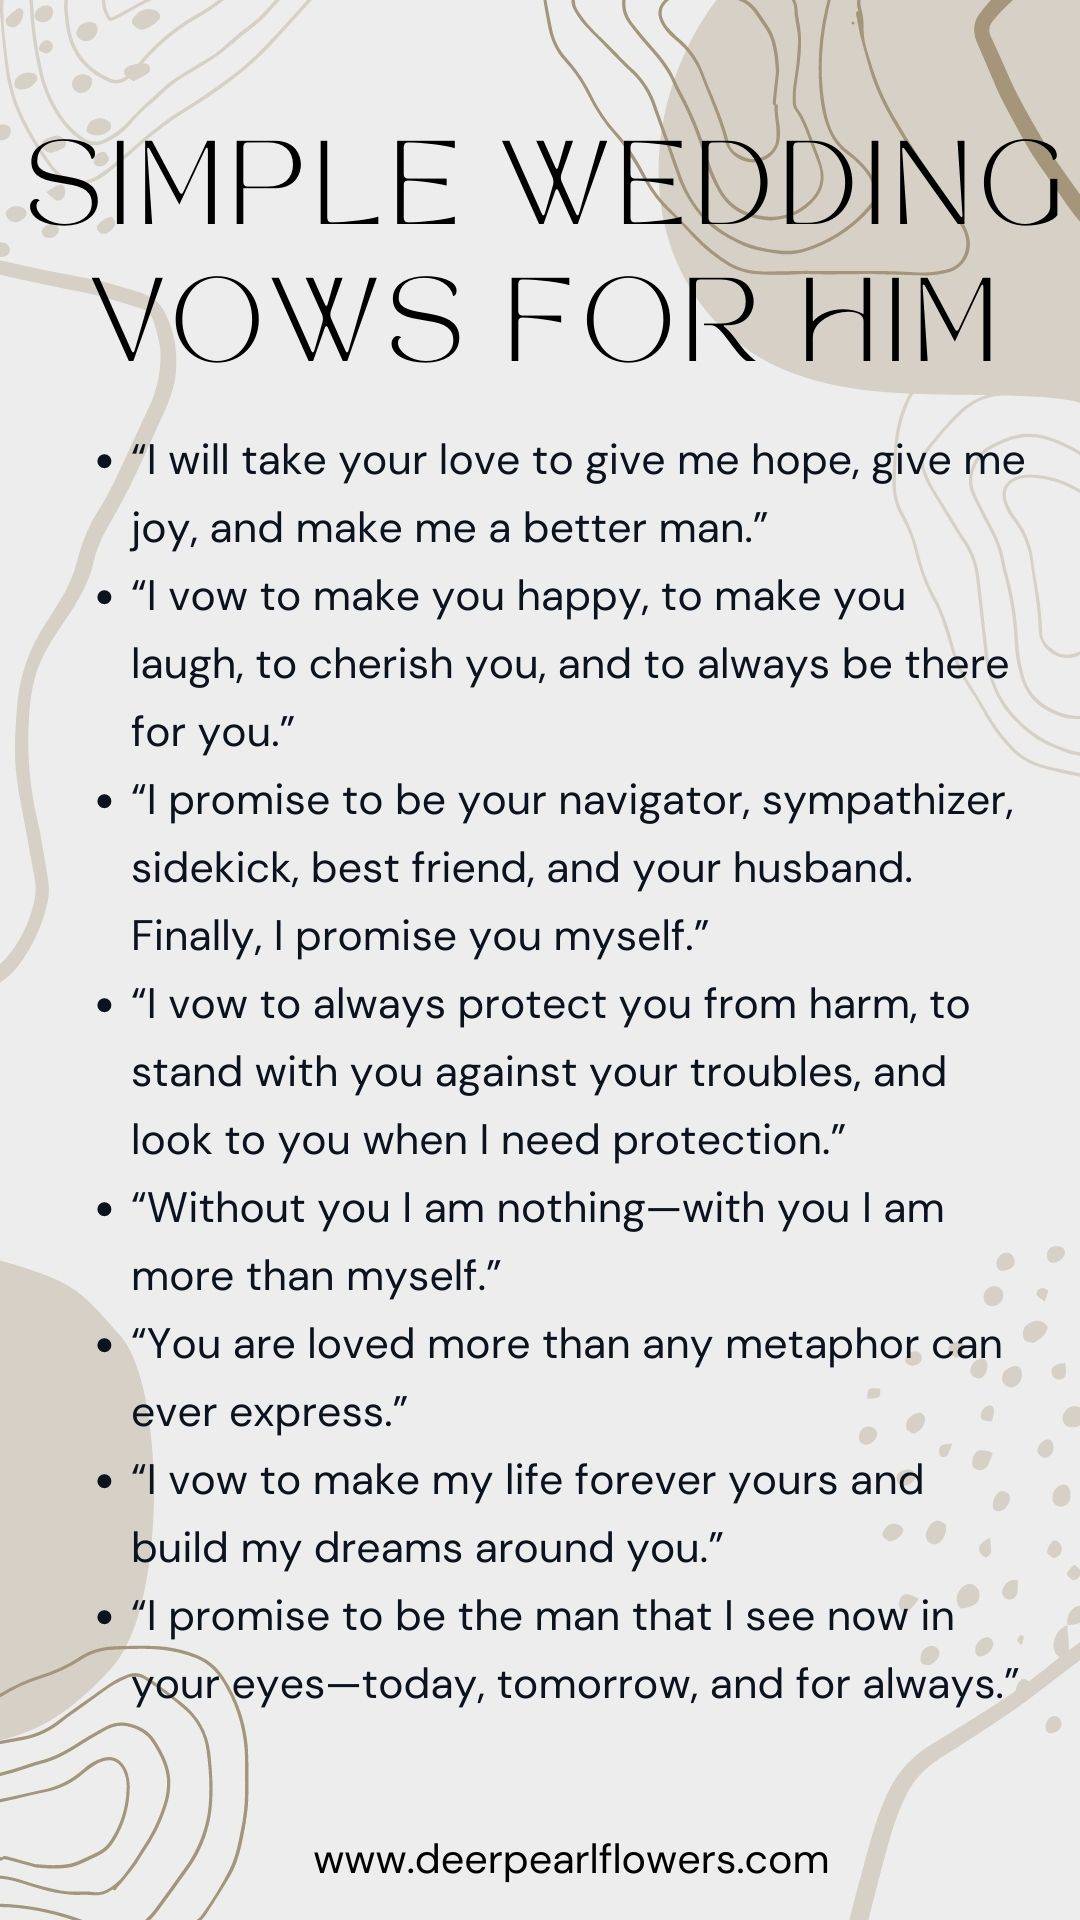 Simple Wedding Vows For Him